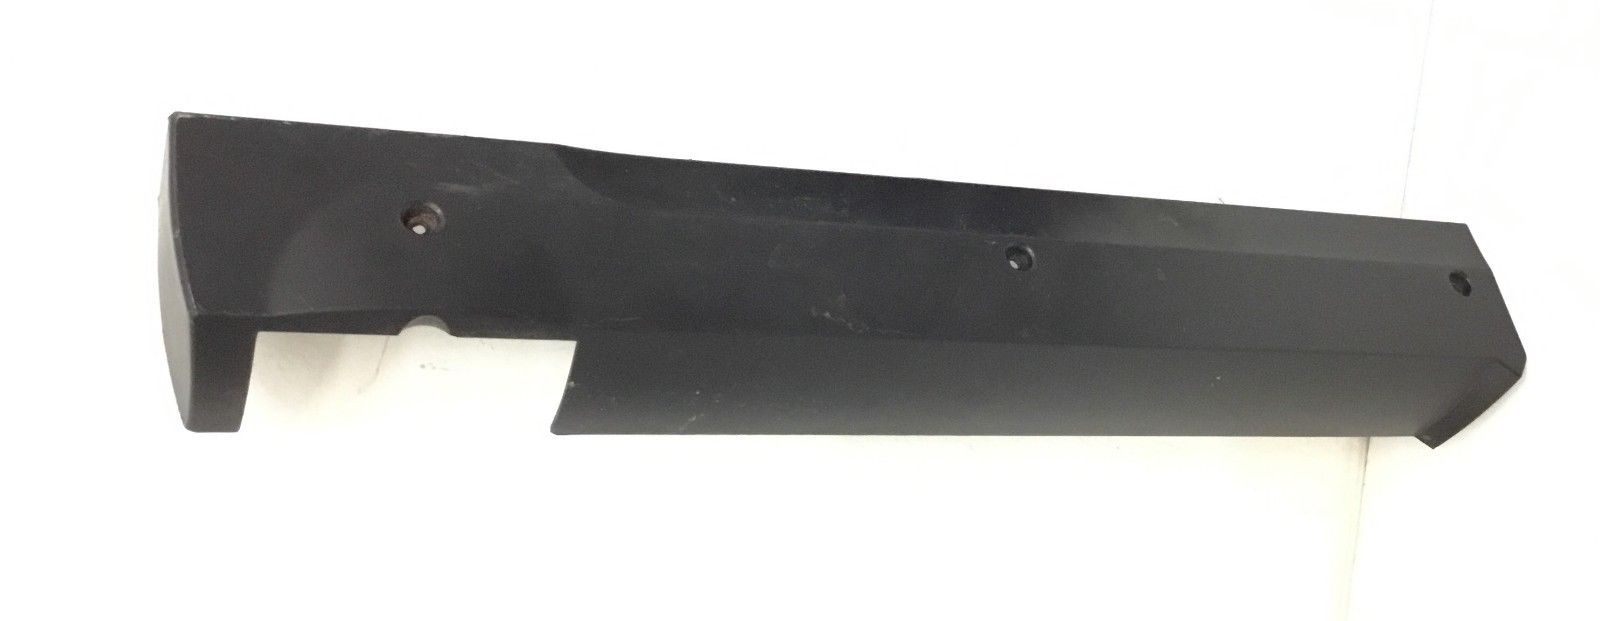 Rear Right Frame Cover (Used)